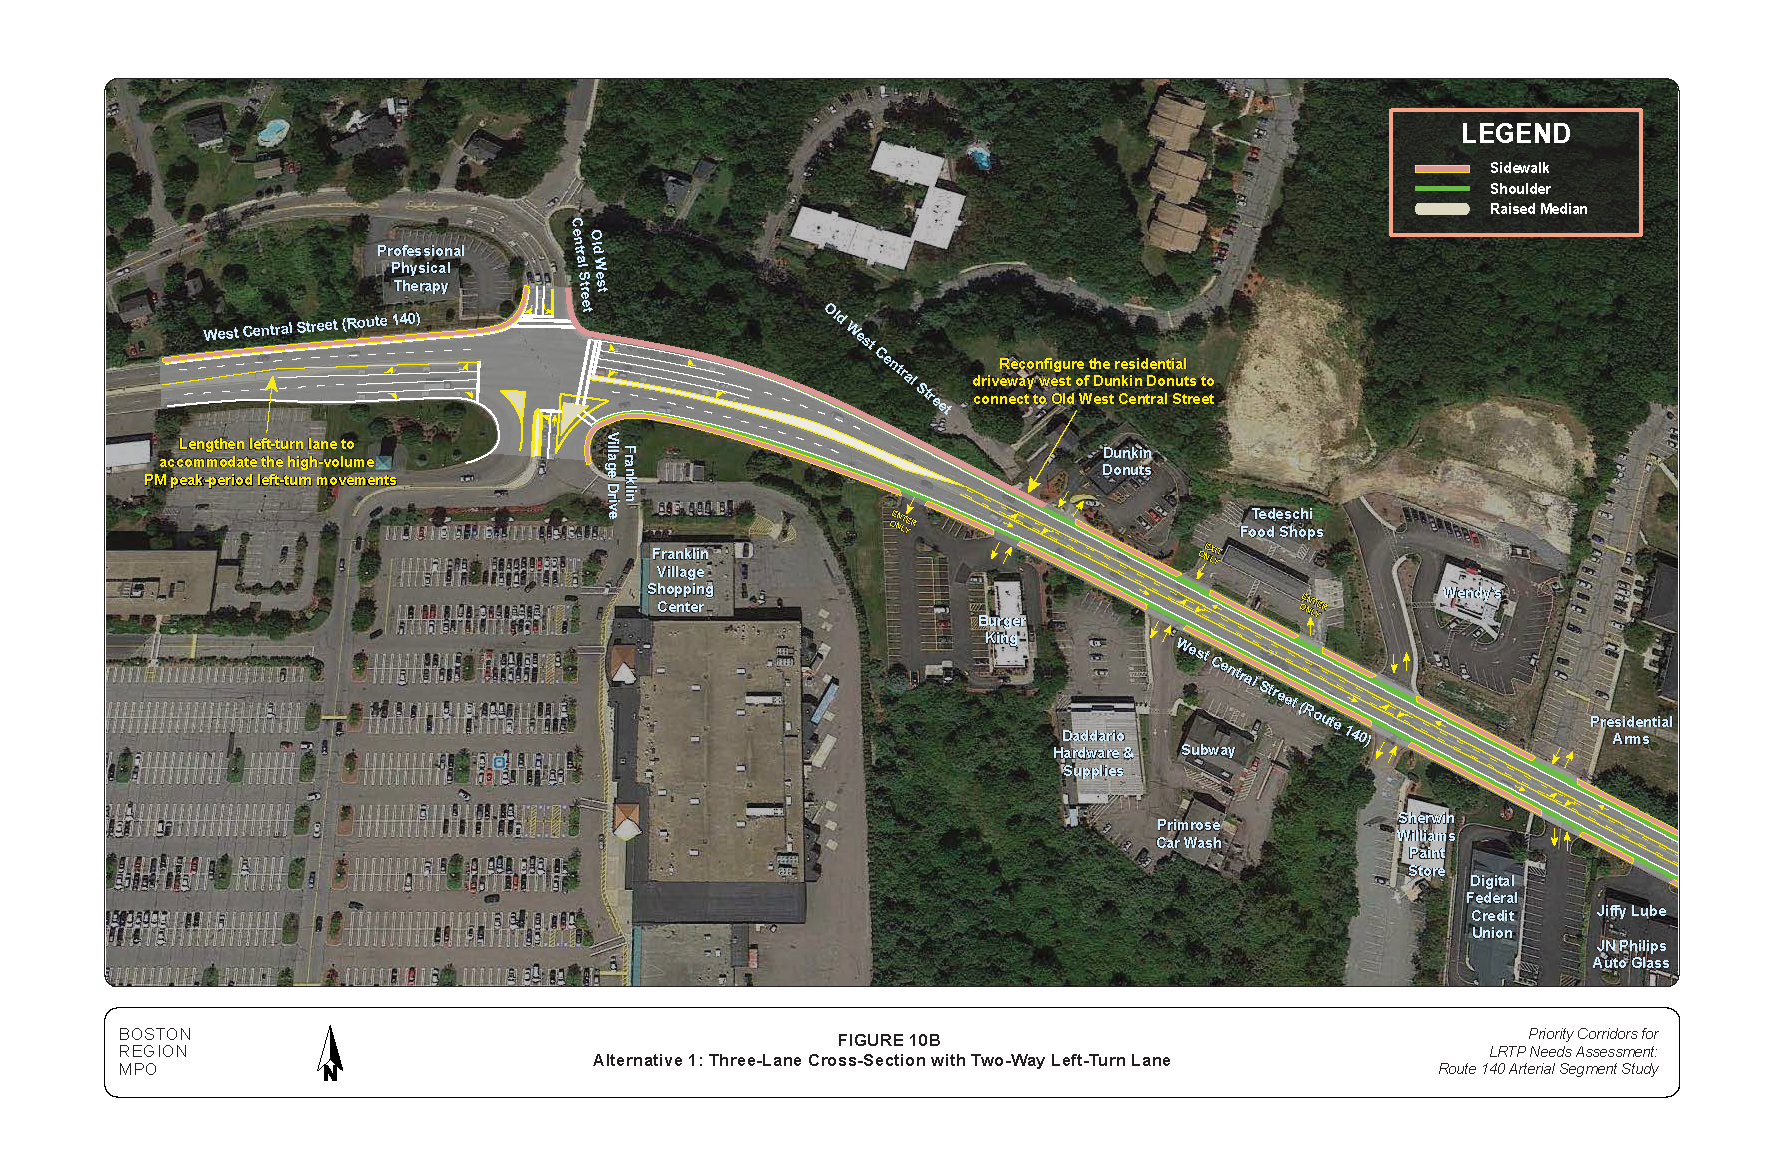 FIGURE 10B: Alternative 1: Three-Lane Cross-Section with Two-Way Left-Turn Lane. Aerial-view map that illustrates MPO staff “Improvement Alternative 1,” which recommends reconfiguring West Central Street into a three-lane cross-section with two-way left-turn lane.